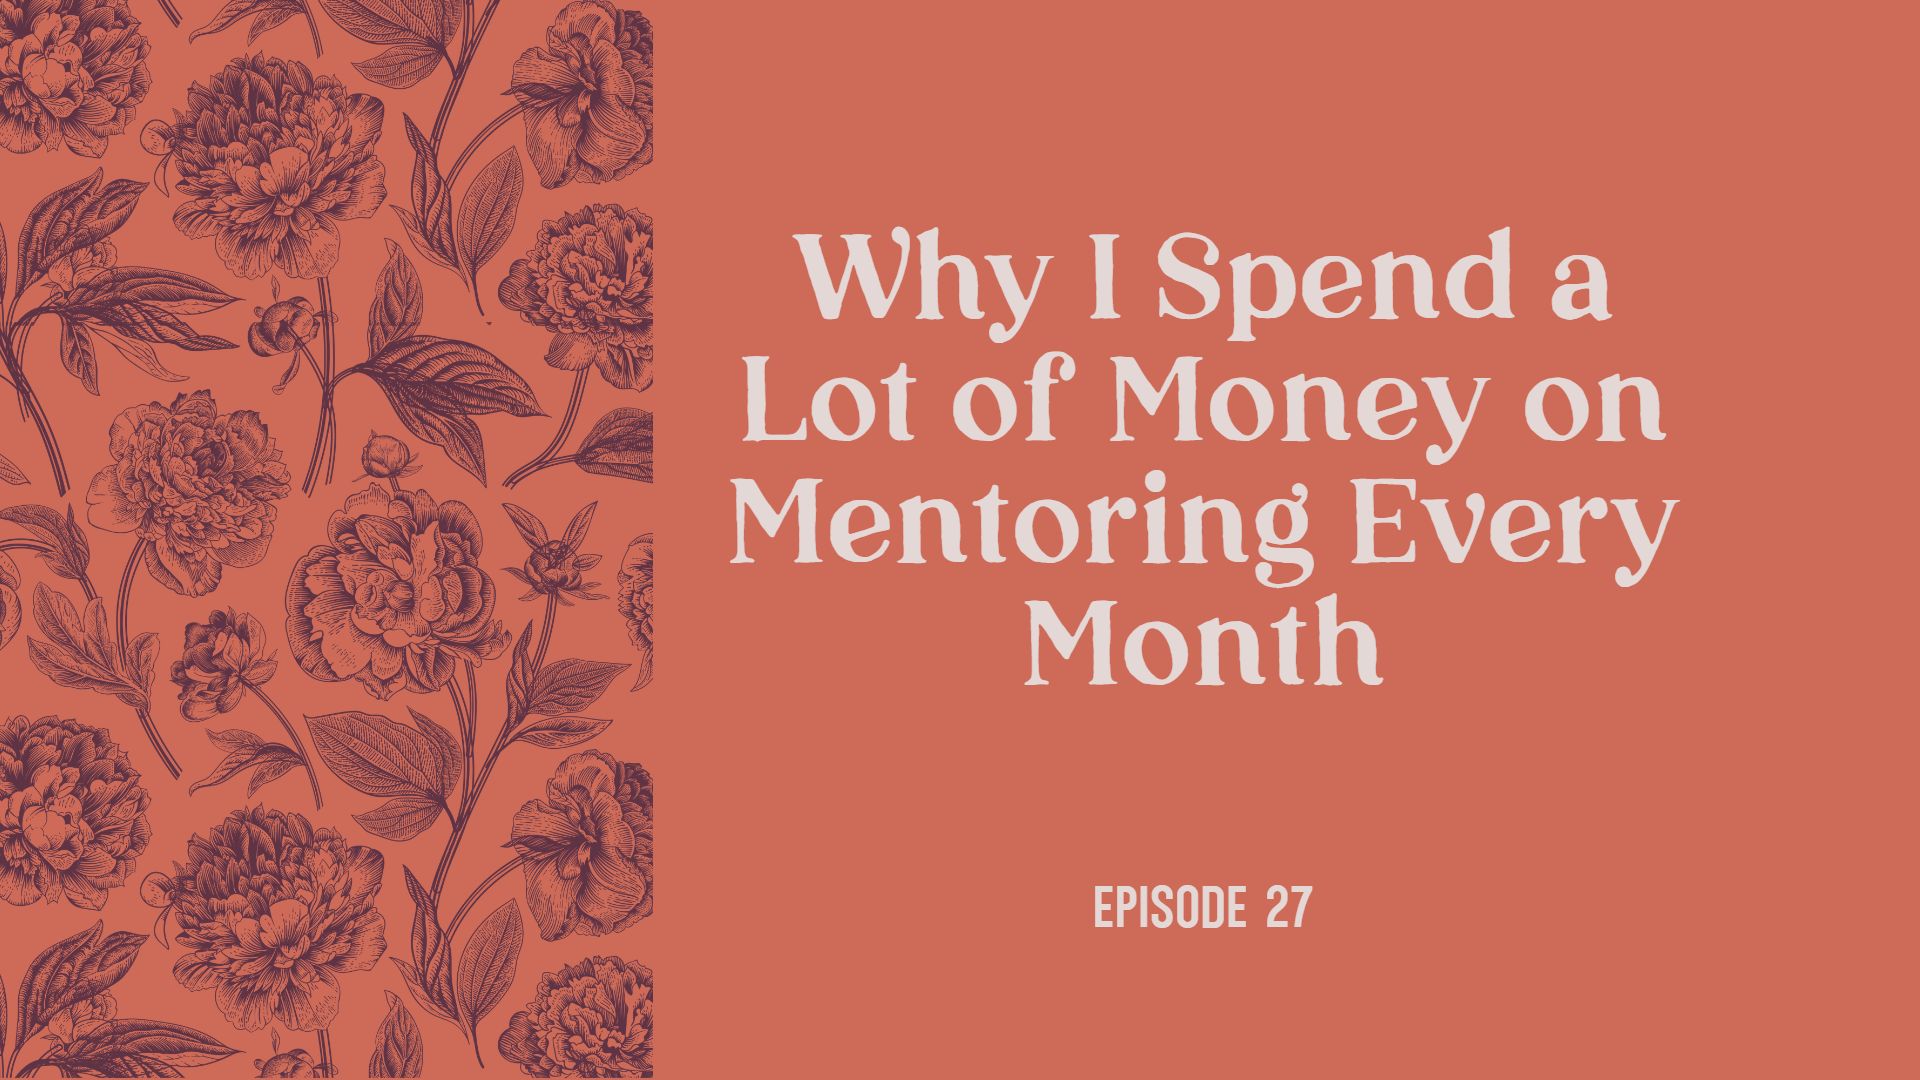 Why I Spend a Lot of Money on Mentoring Every Month